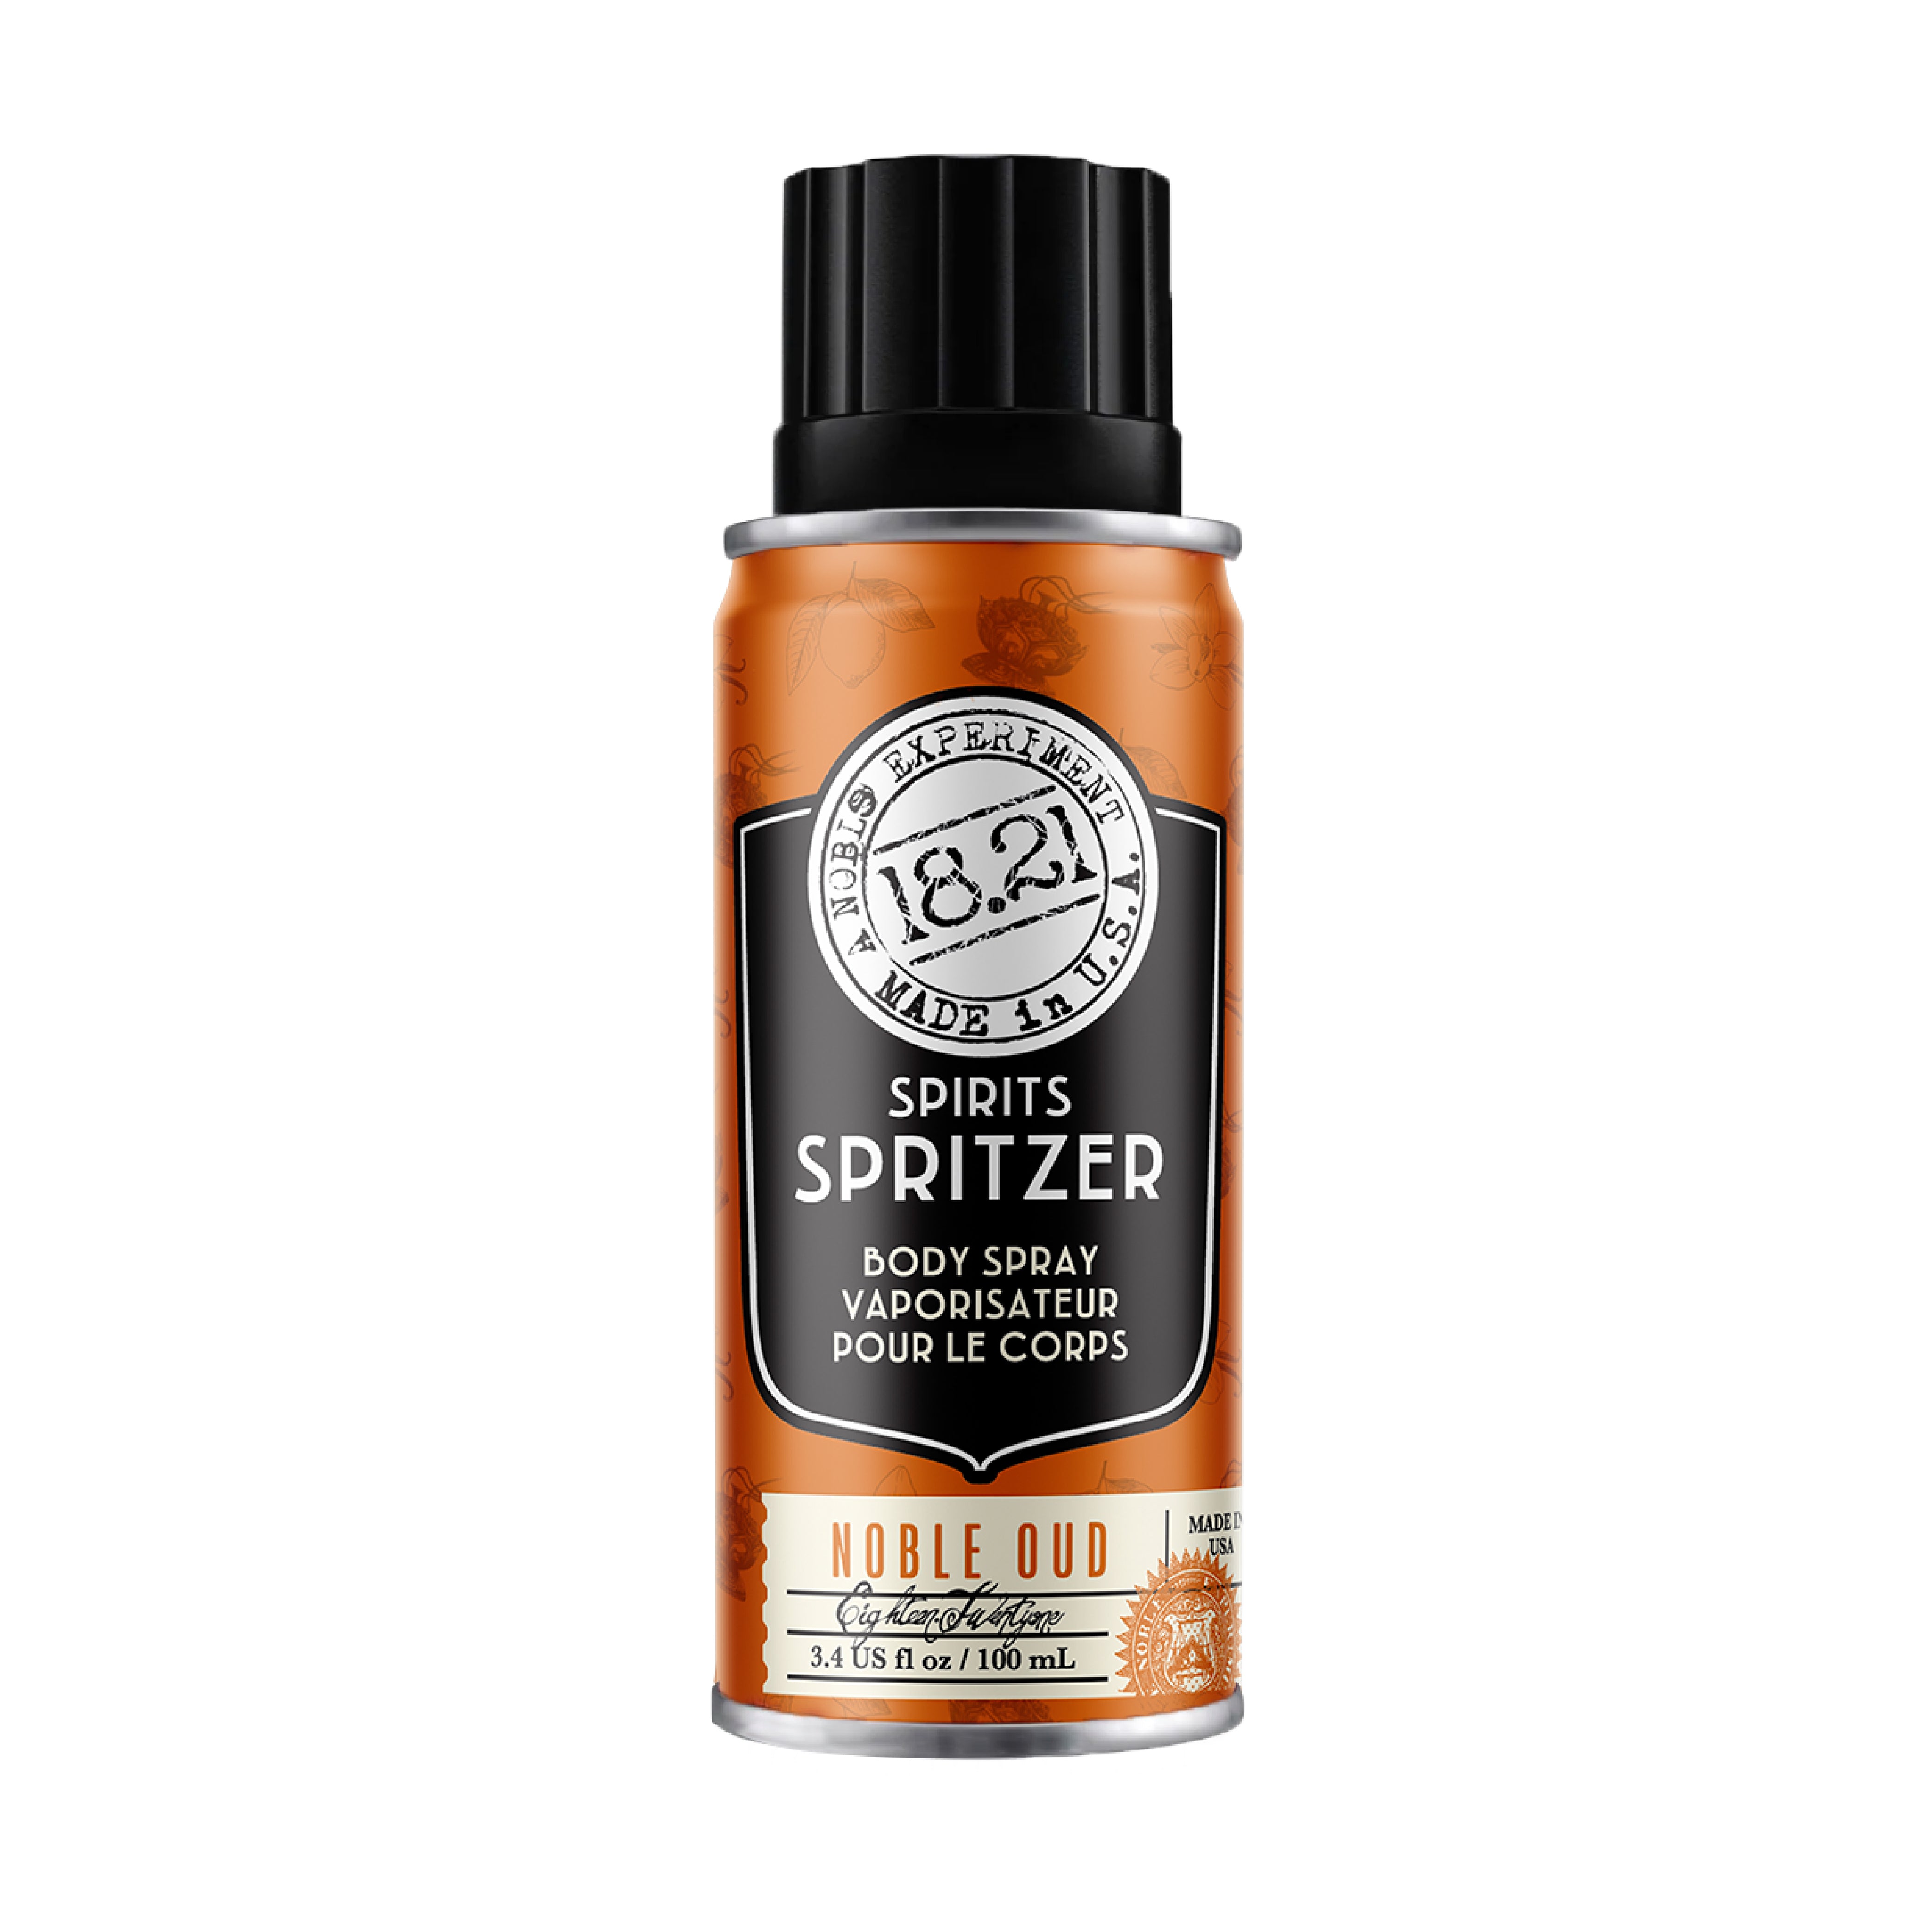 18.21 Man Made Spirits Spritzer Body Spray in Noble Oud scent